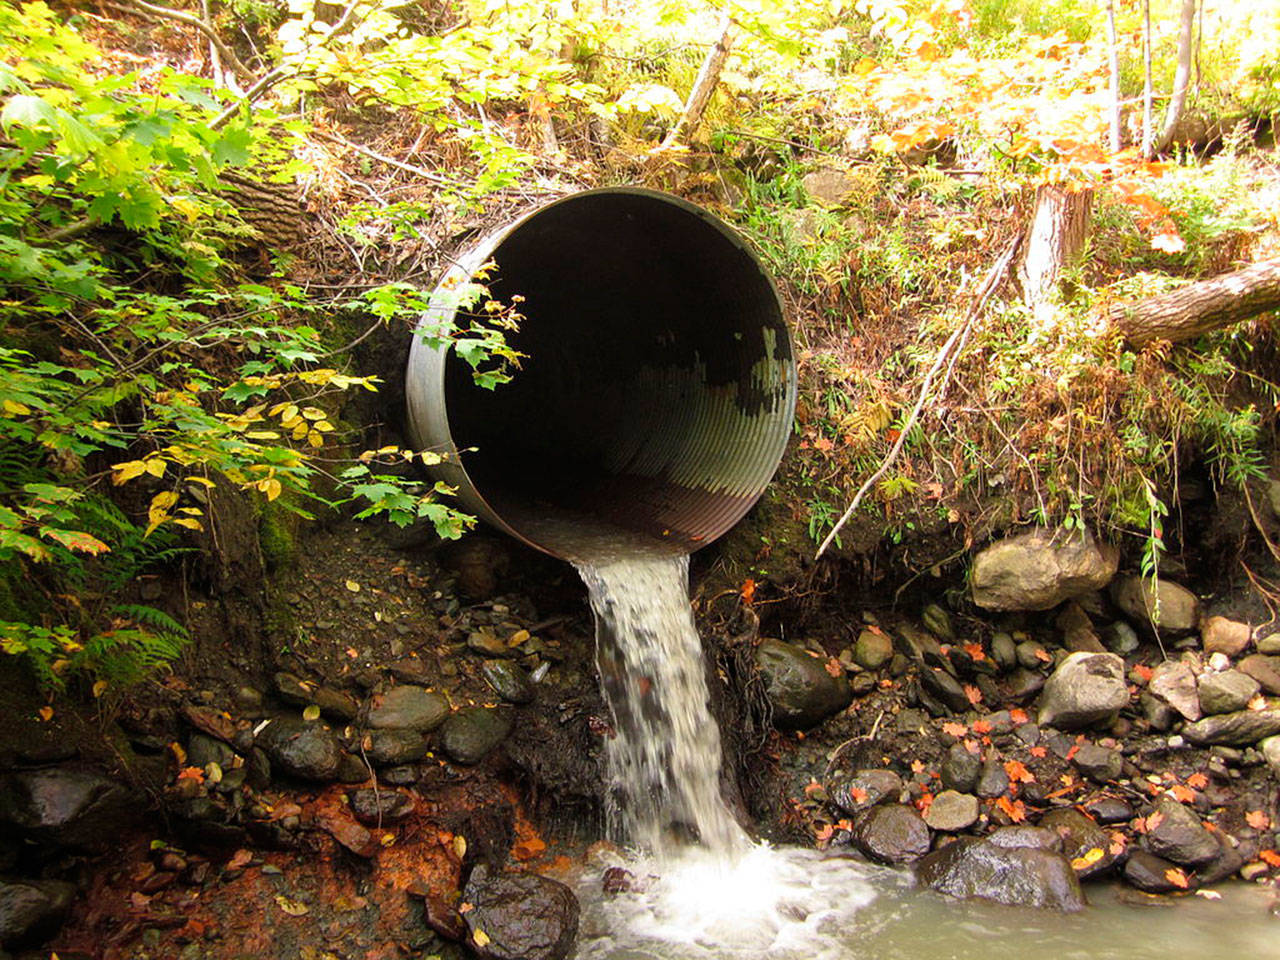 An example of a fish culvert that prevents fish from migrating through it. Creative commons